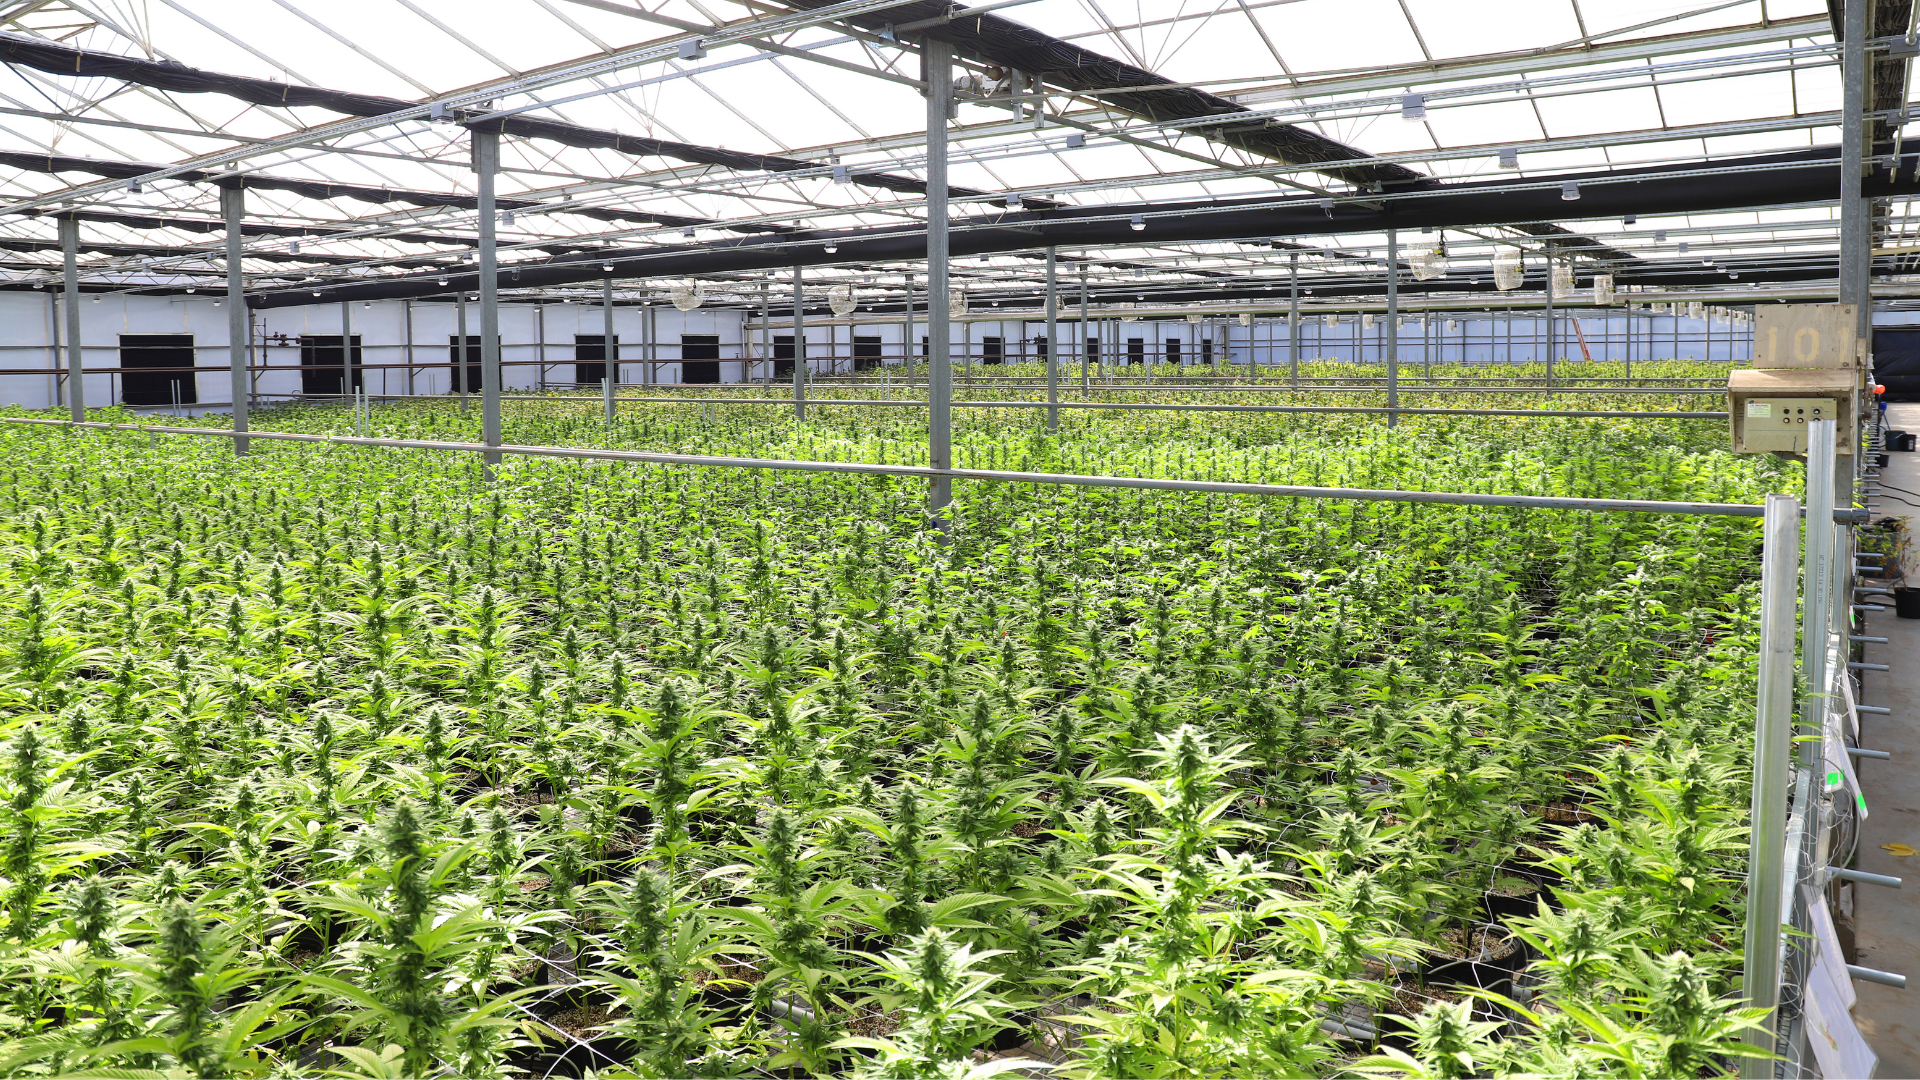 Cannabis plants growing in a commercial greenhouse